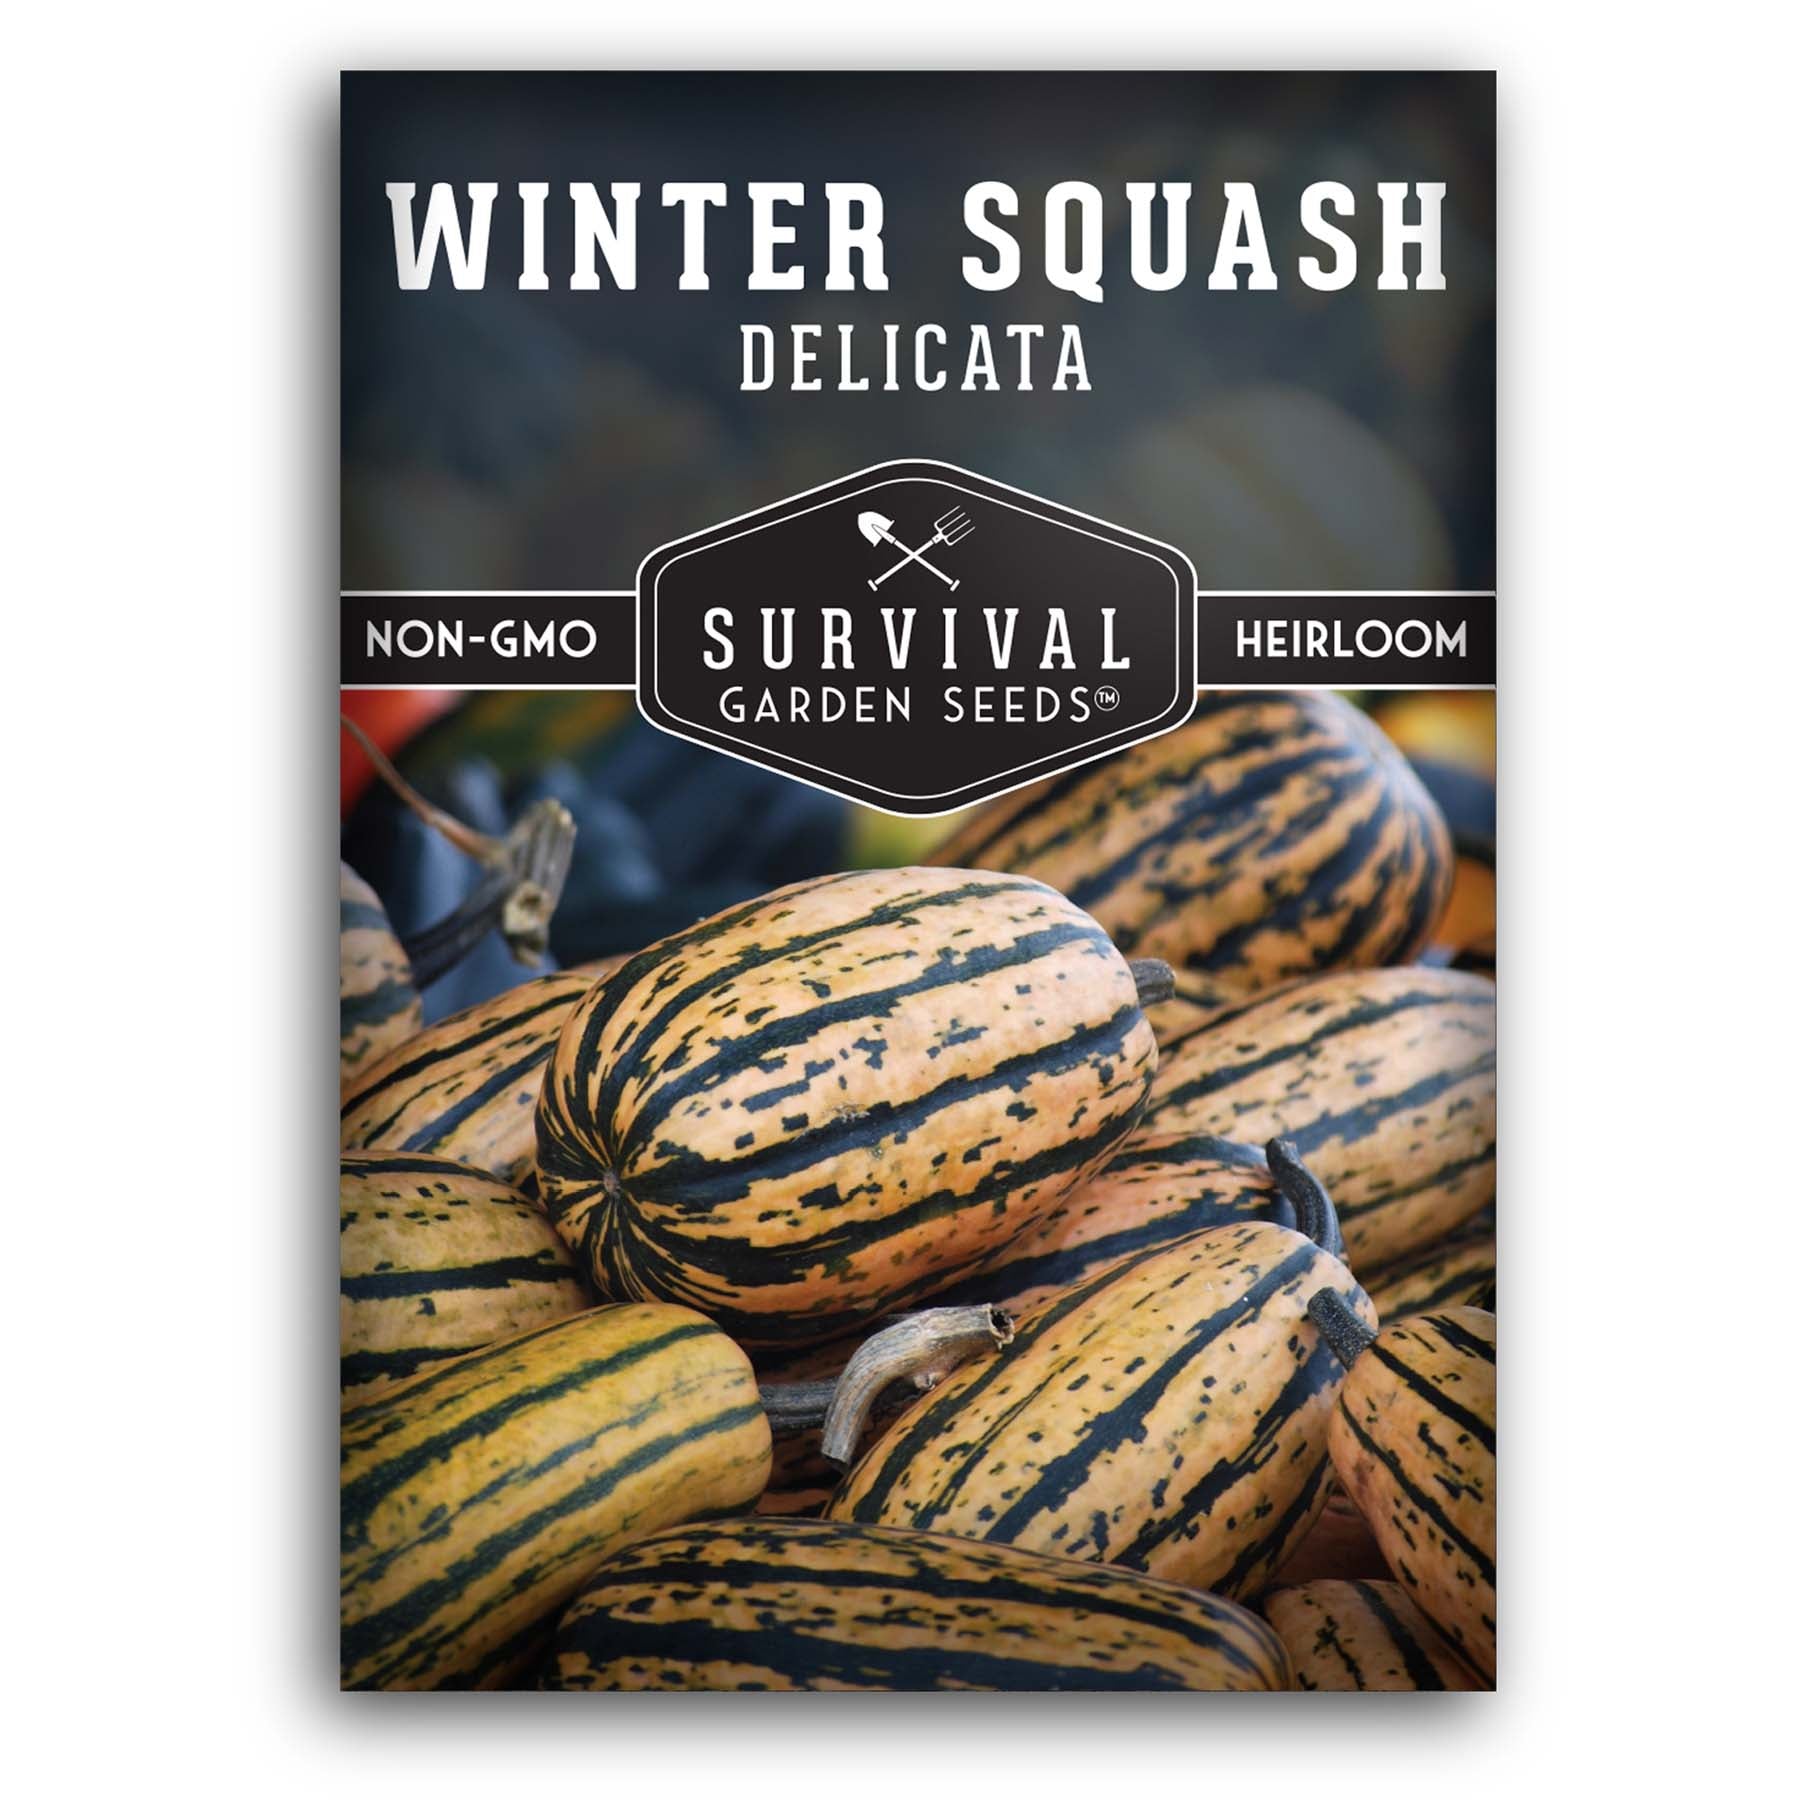 Delicata Winter Squash seeds for planting